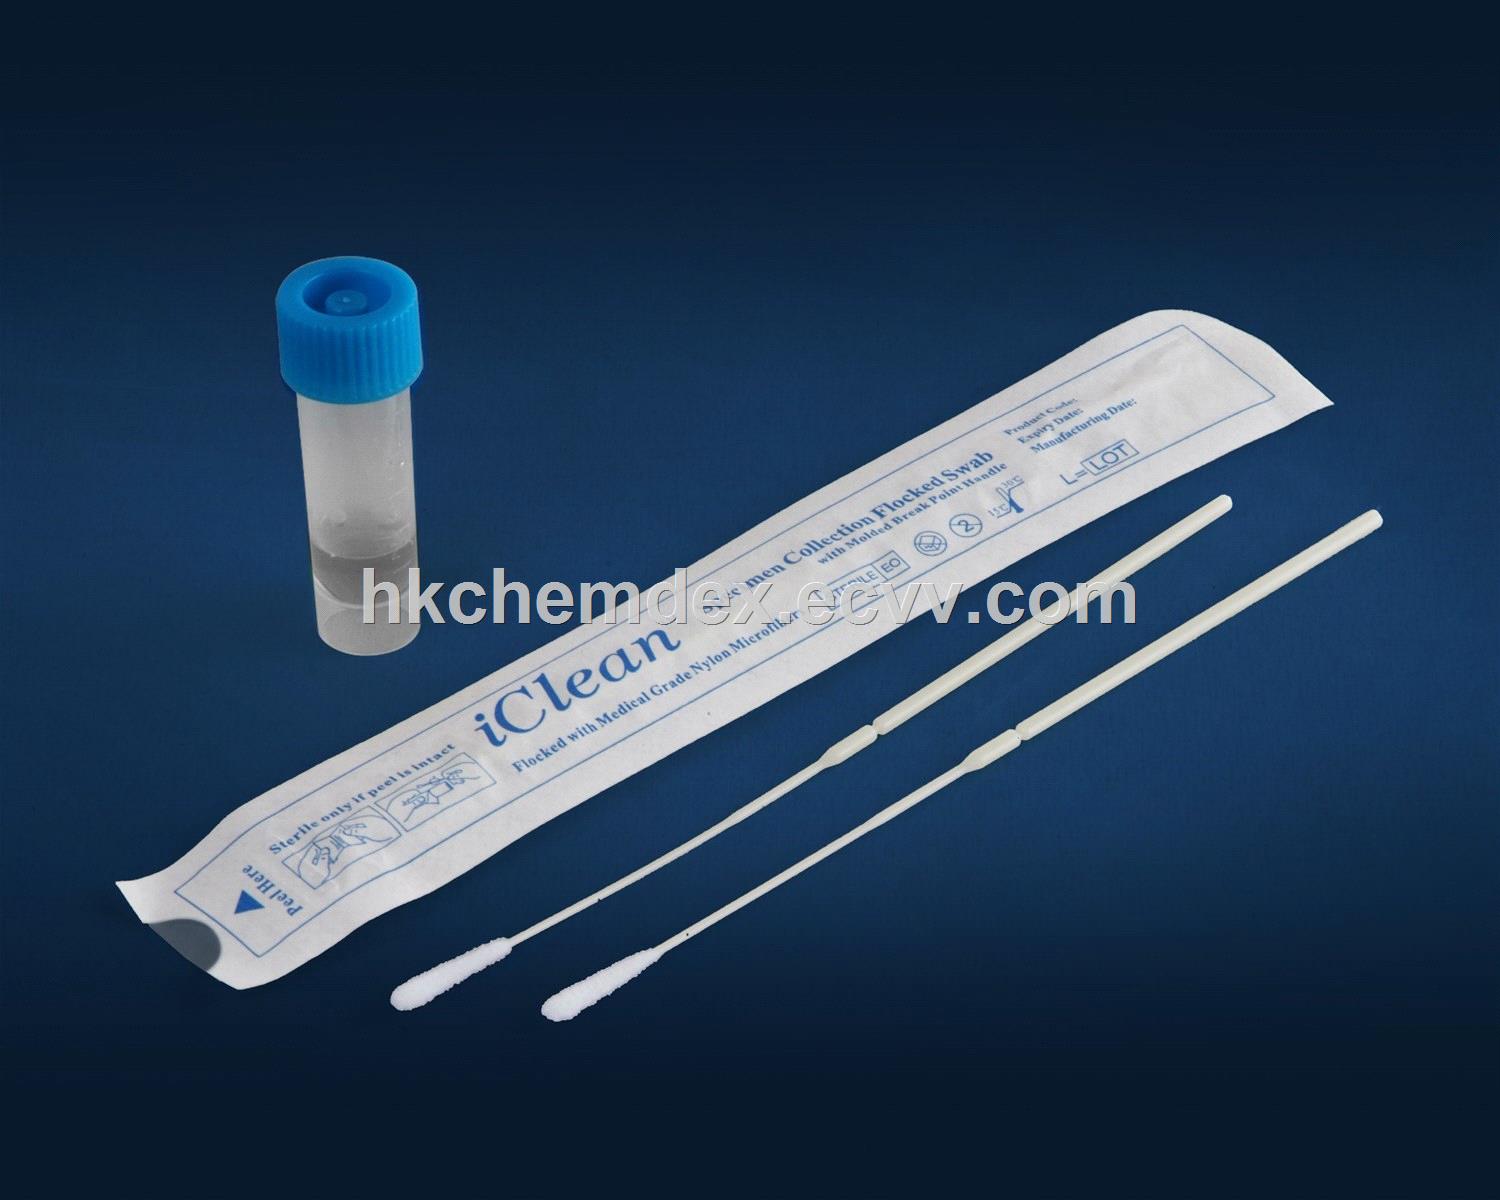 Sterilized Nasopharyngeal cell specimen collection Flocked Swabs for COVID19